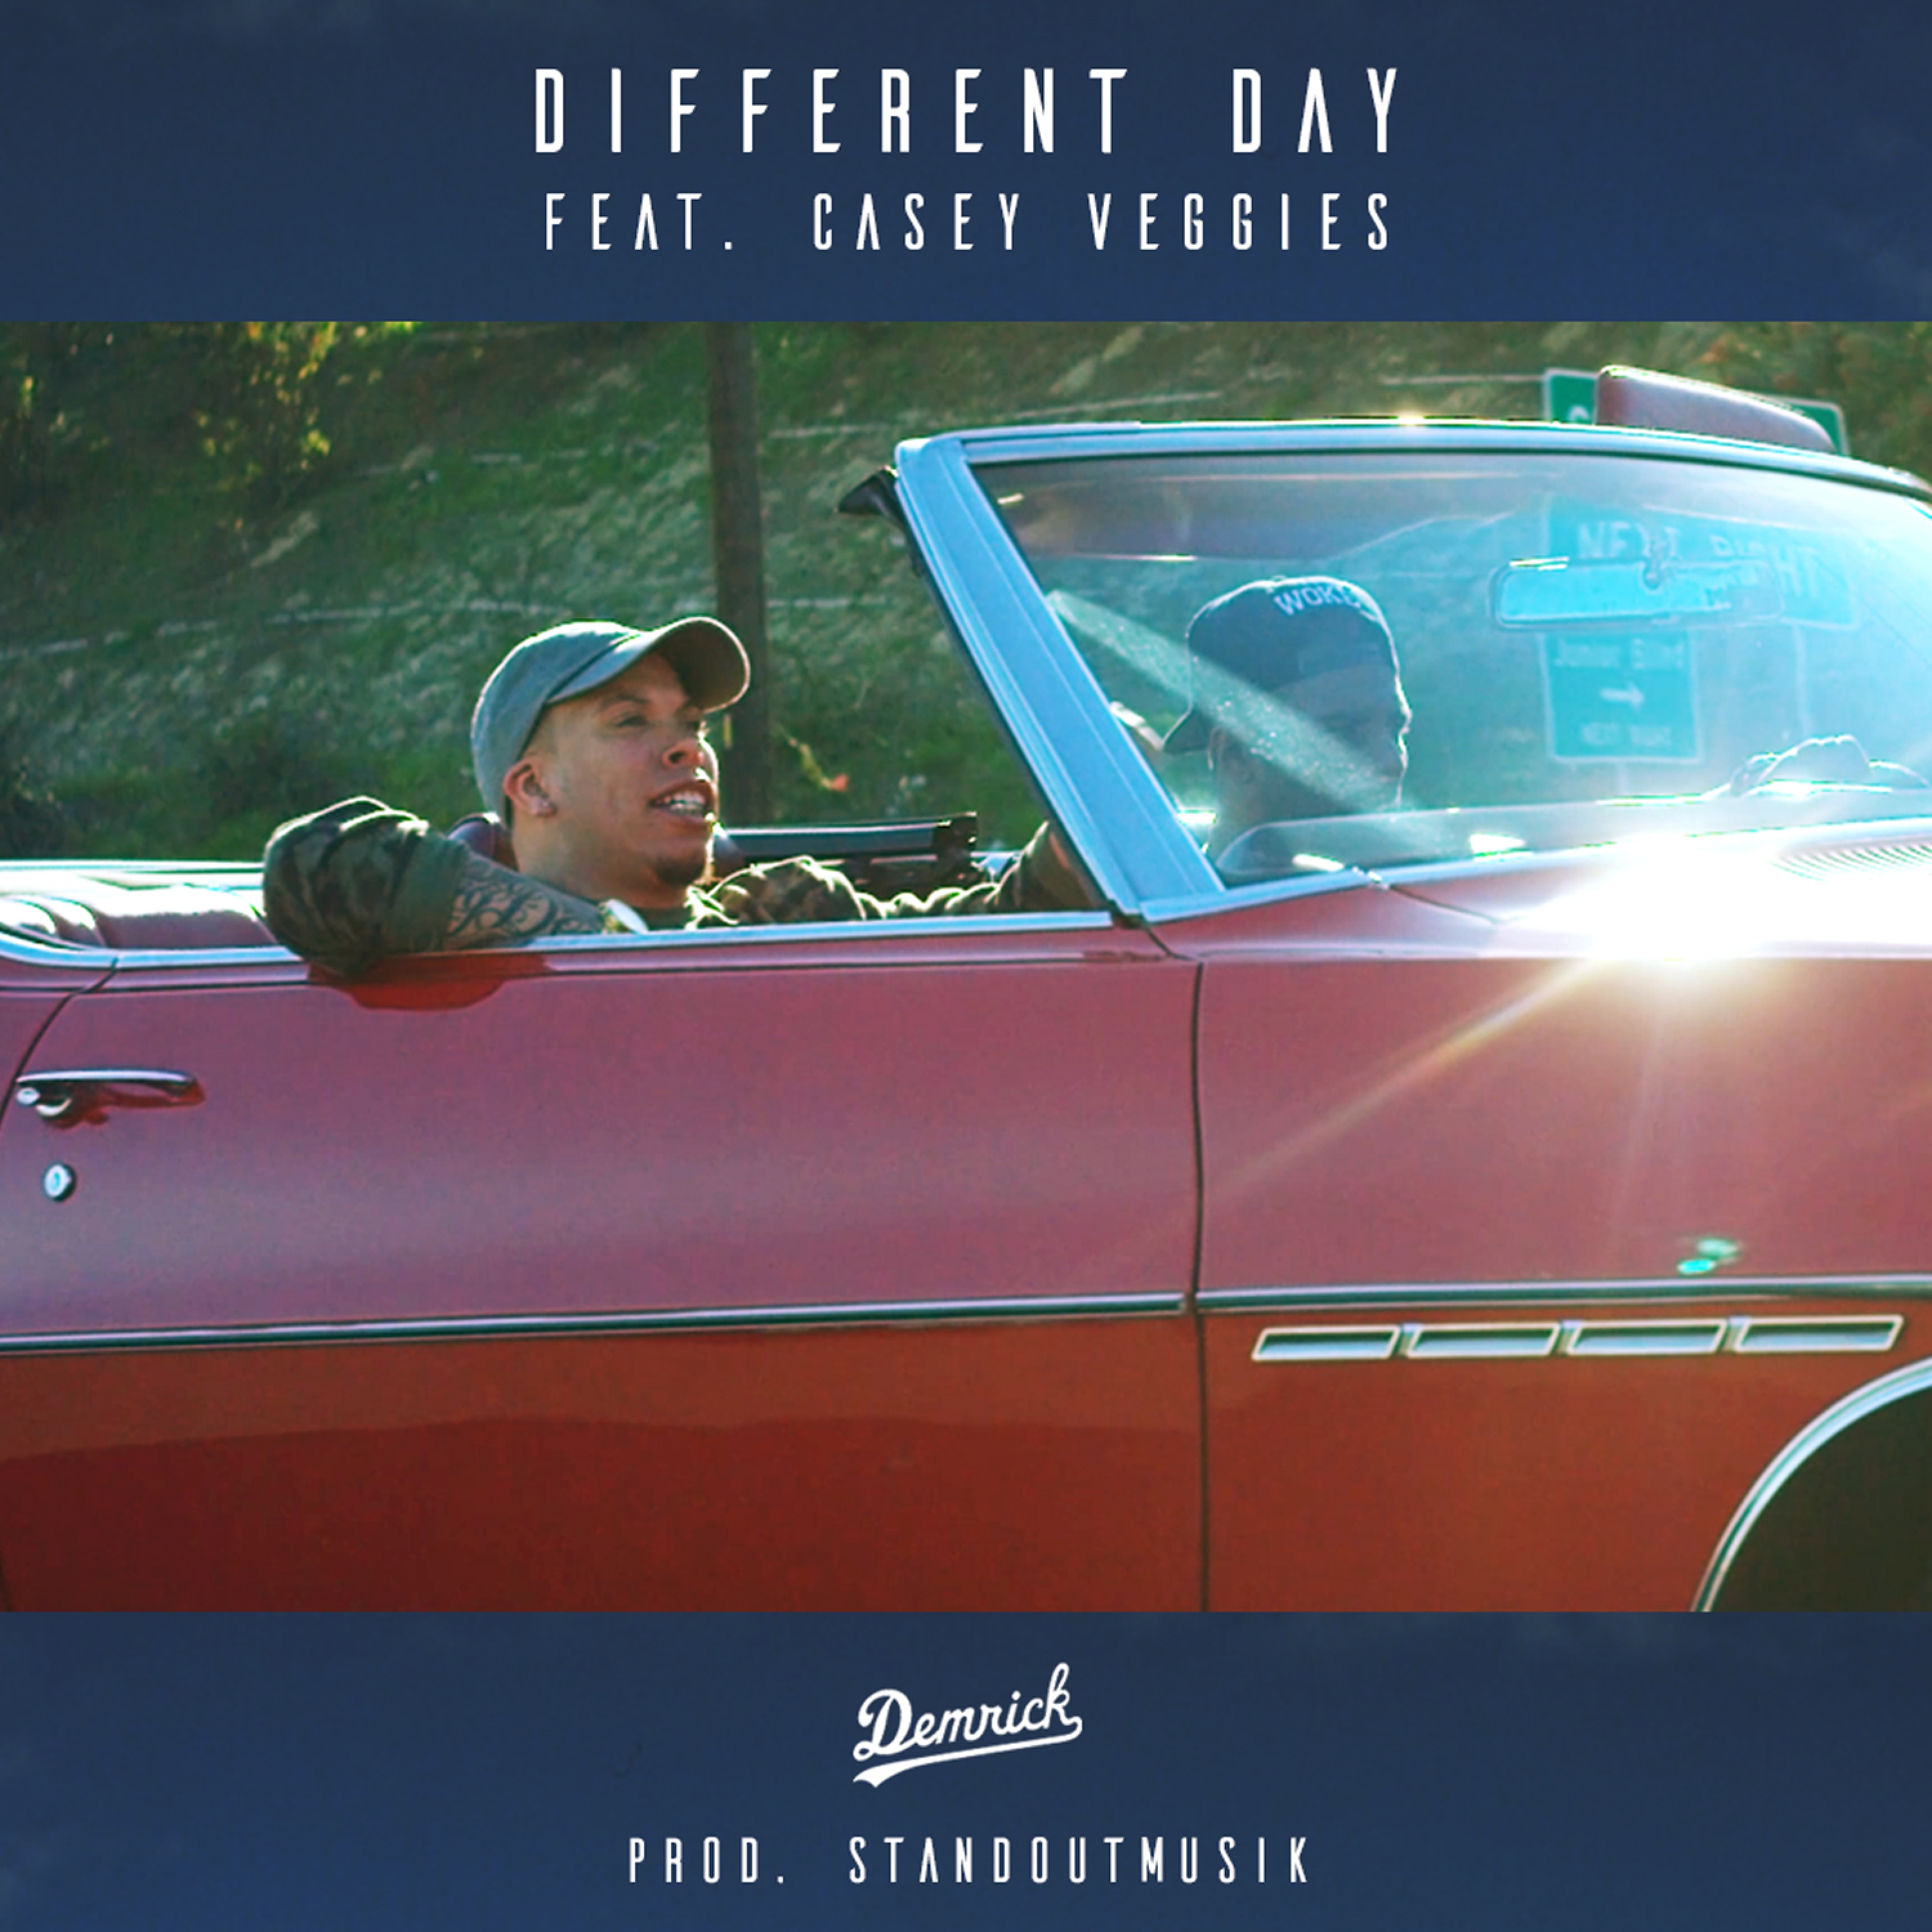 Different Day (Feat. Casey Veggies) - Single